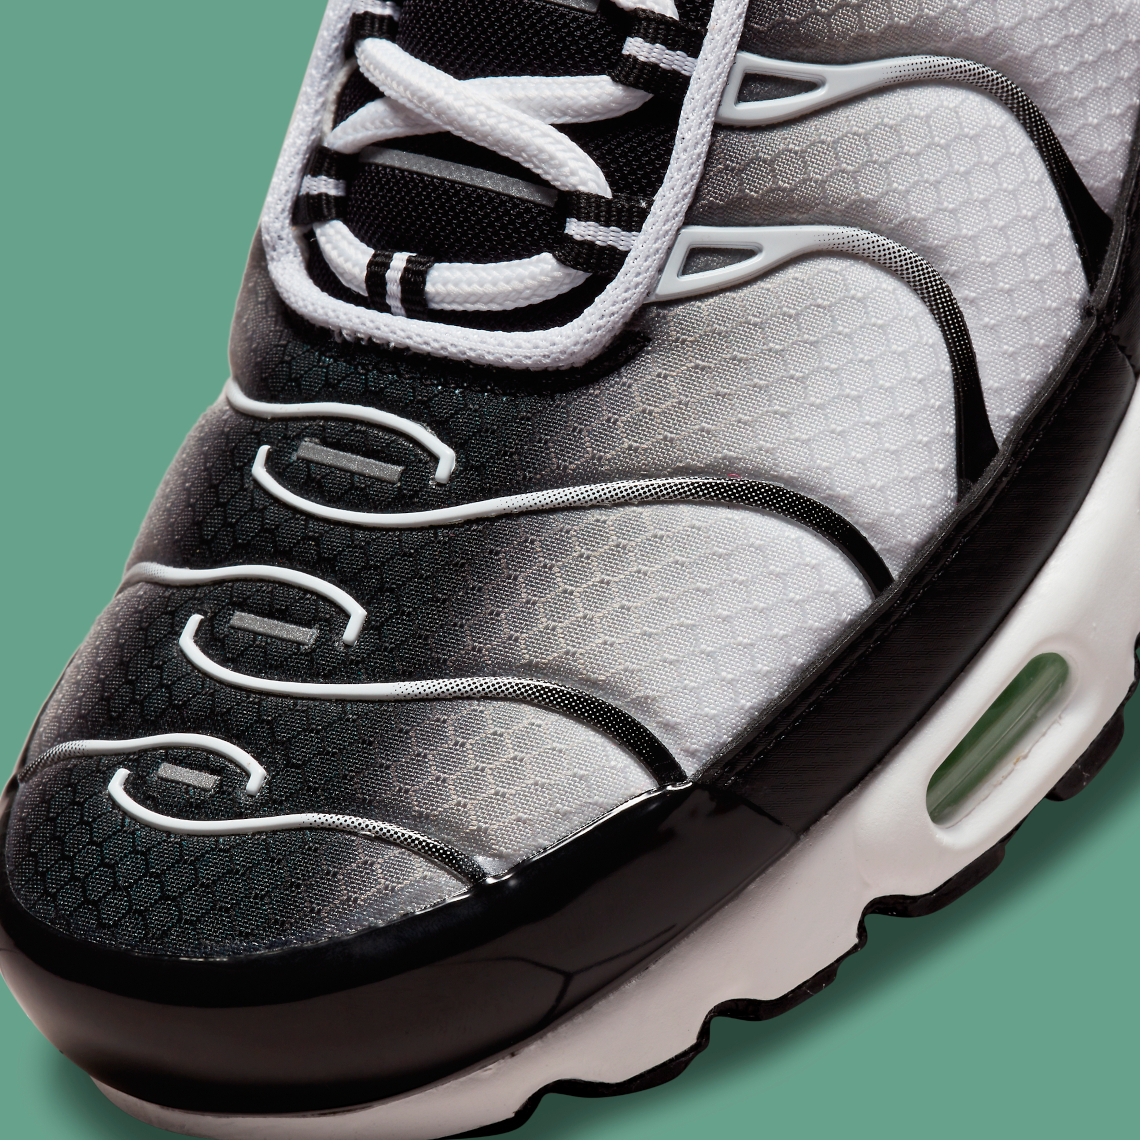 Greyscale Gradients And “Seafoam”-Like Swooshes Share This Nike Air Max ...